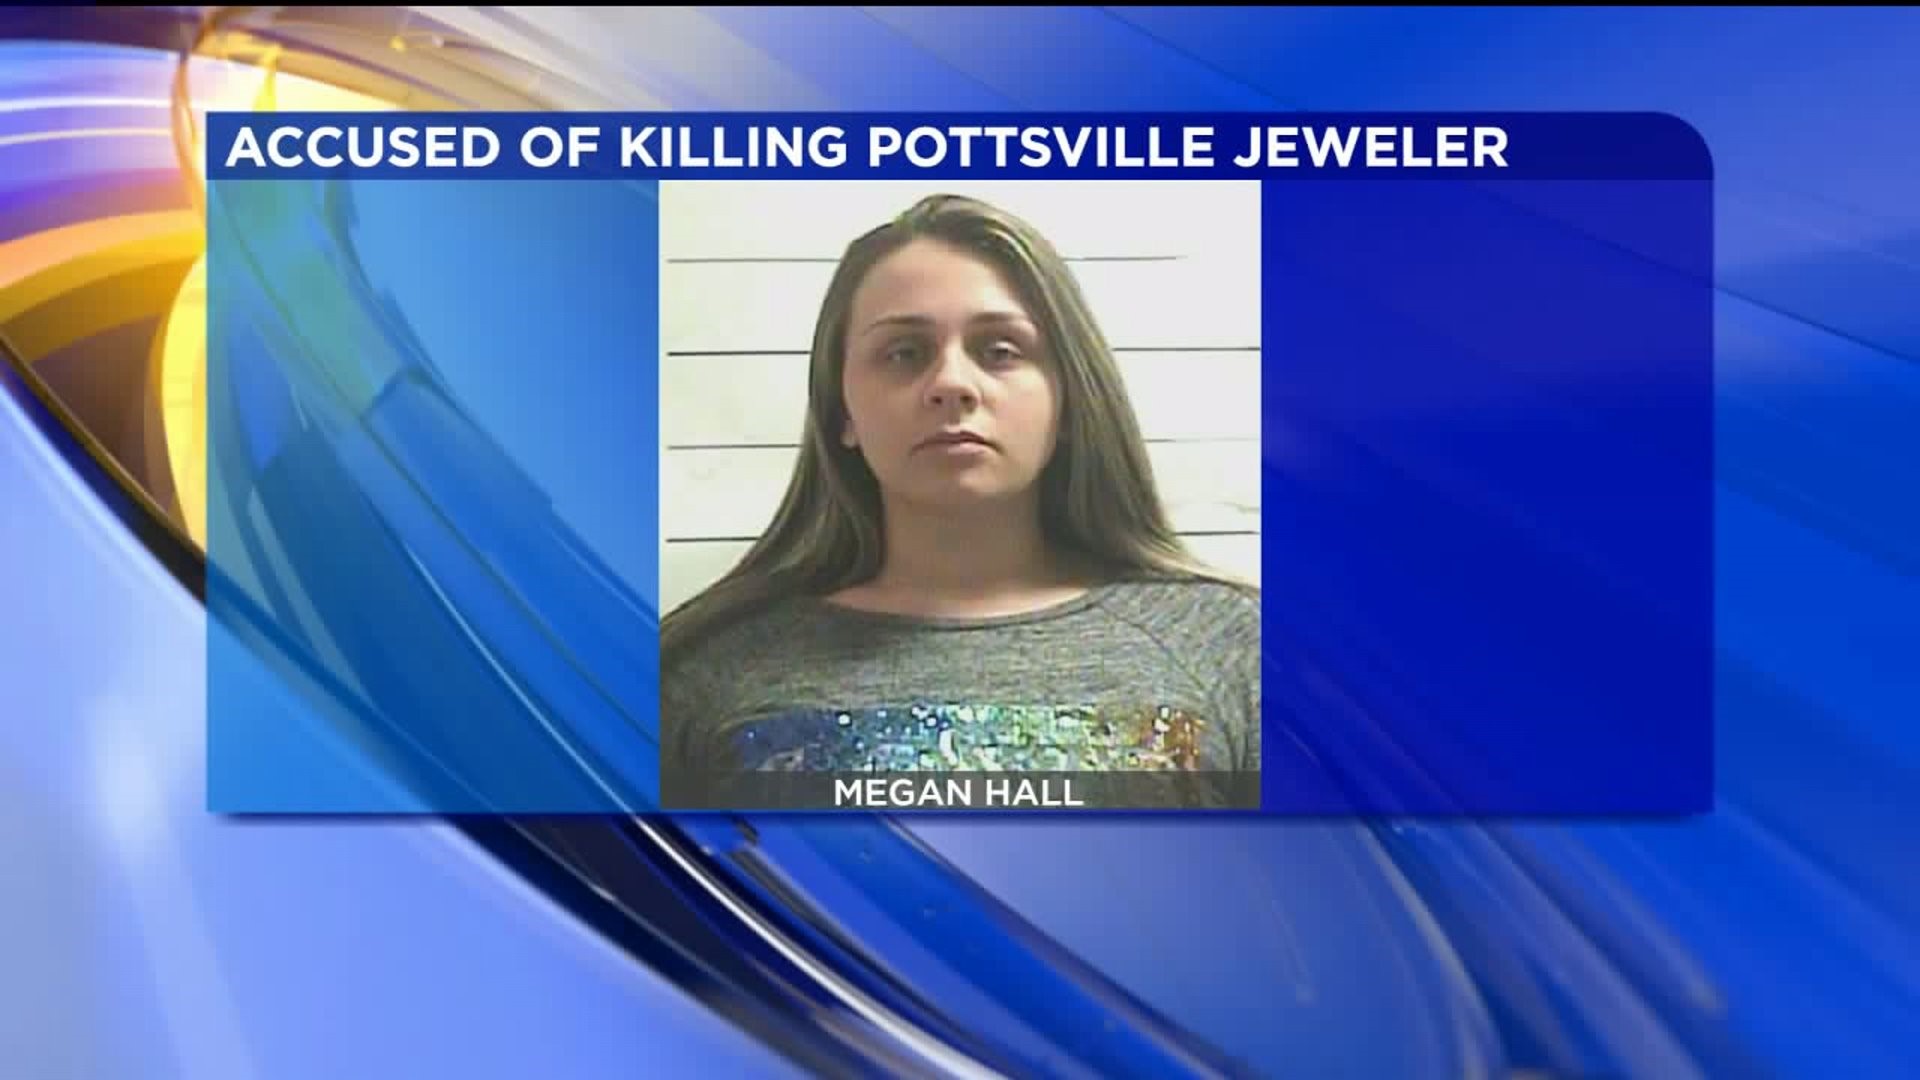 New Orleans Woman Indicted on Charges After Allegedly Murdering Pottsville Businessman